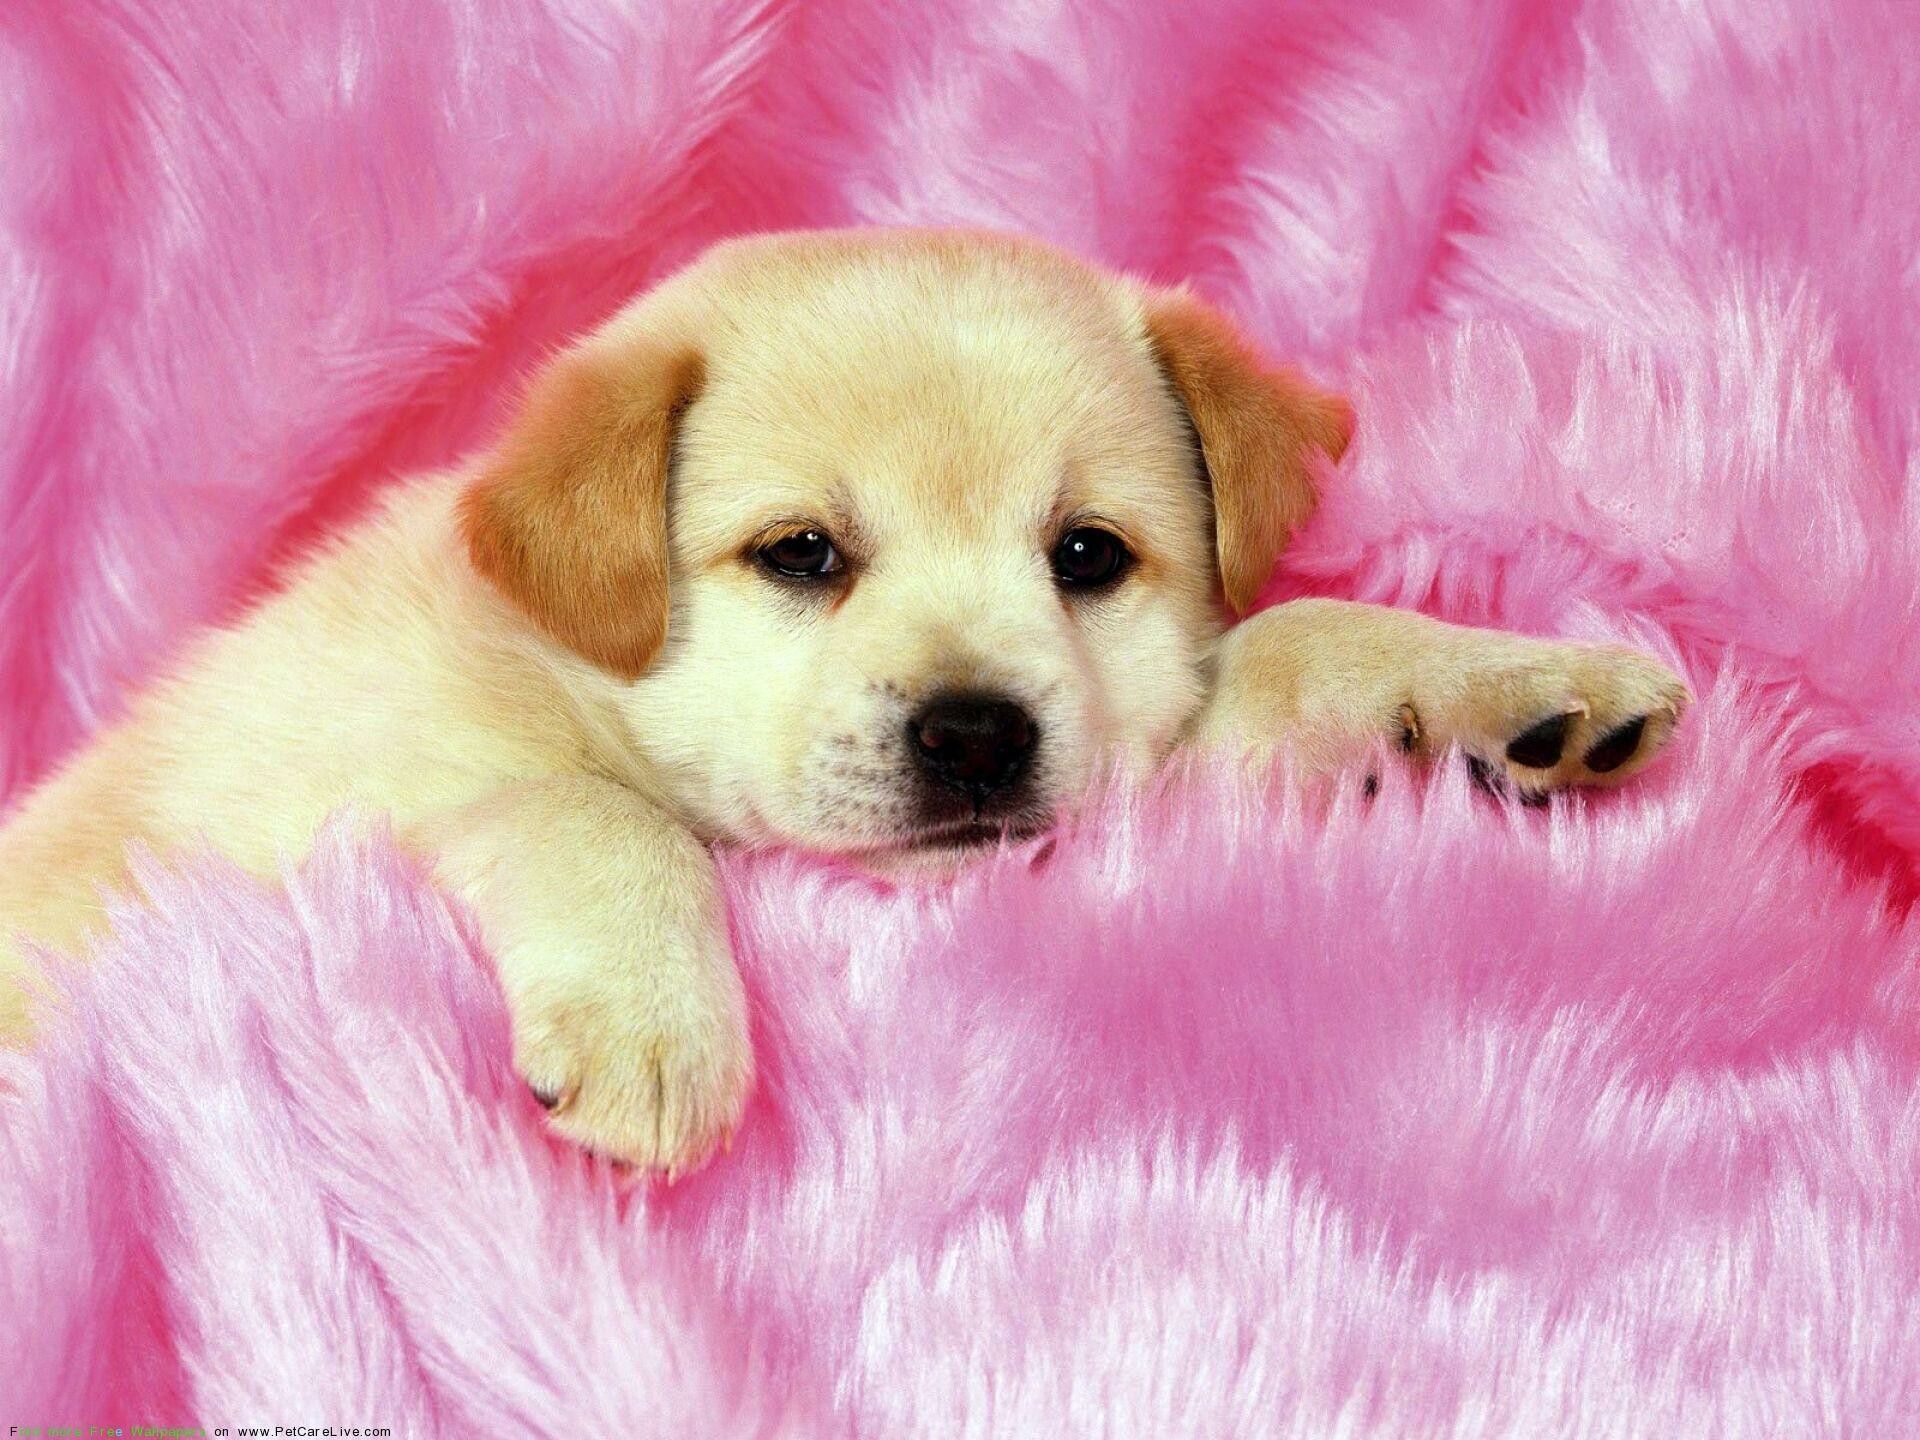 Dog: Puppy, Most popular domestic animals in the world. 1920x1440 HD Background.